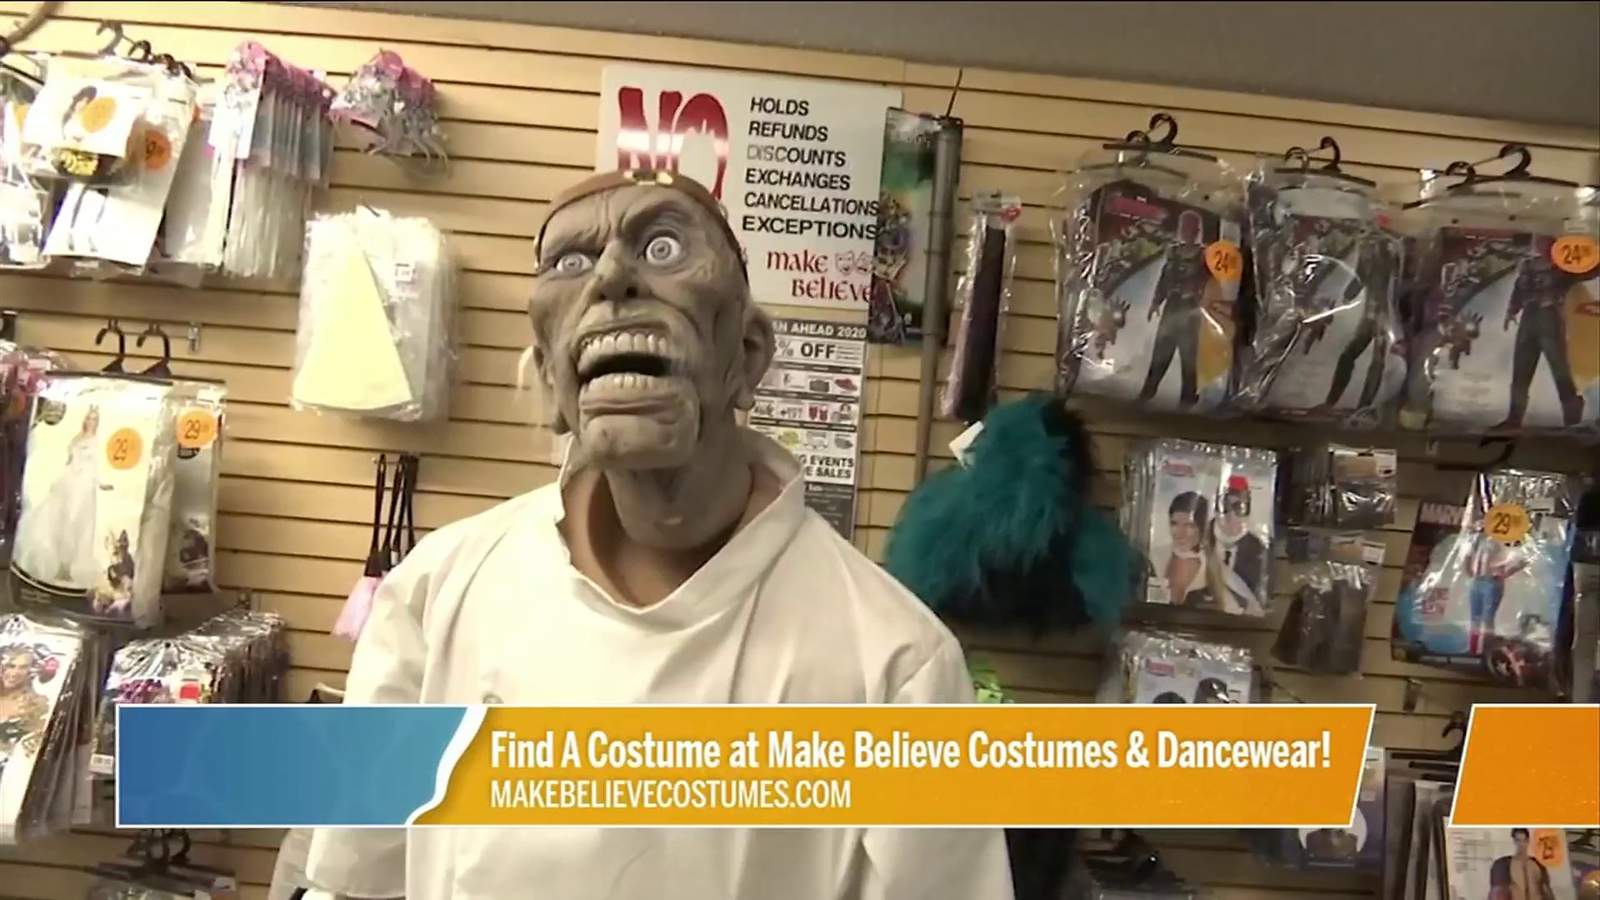 Find A Costume at Make Believe Costumes & Dancewear | River City Live